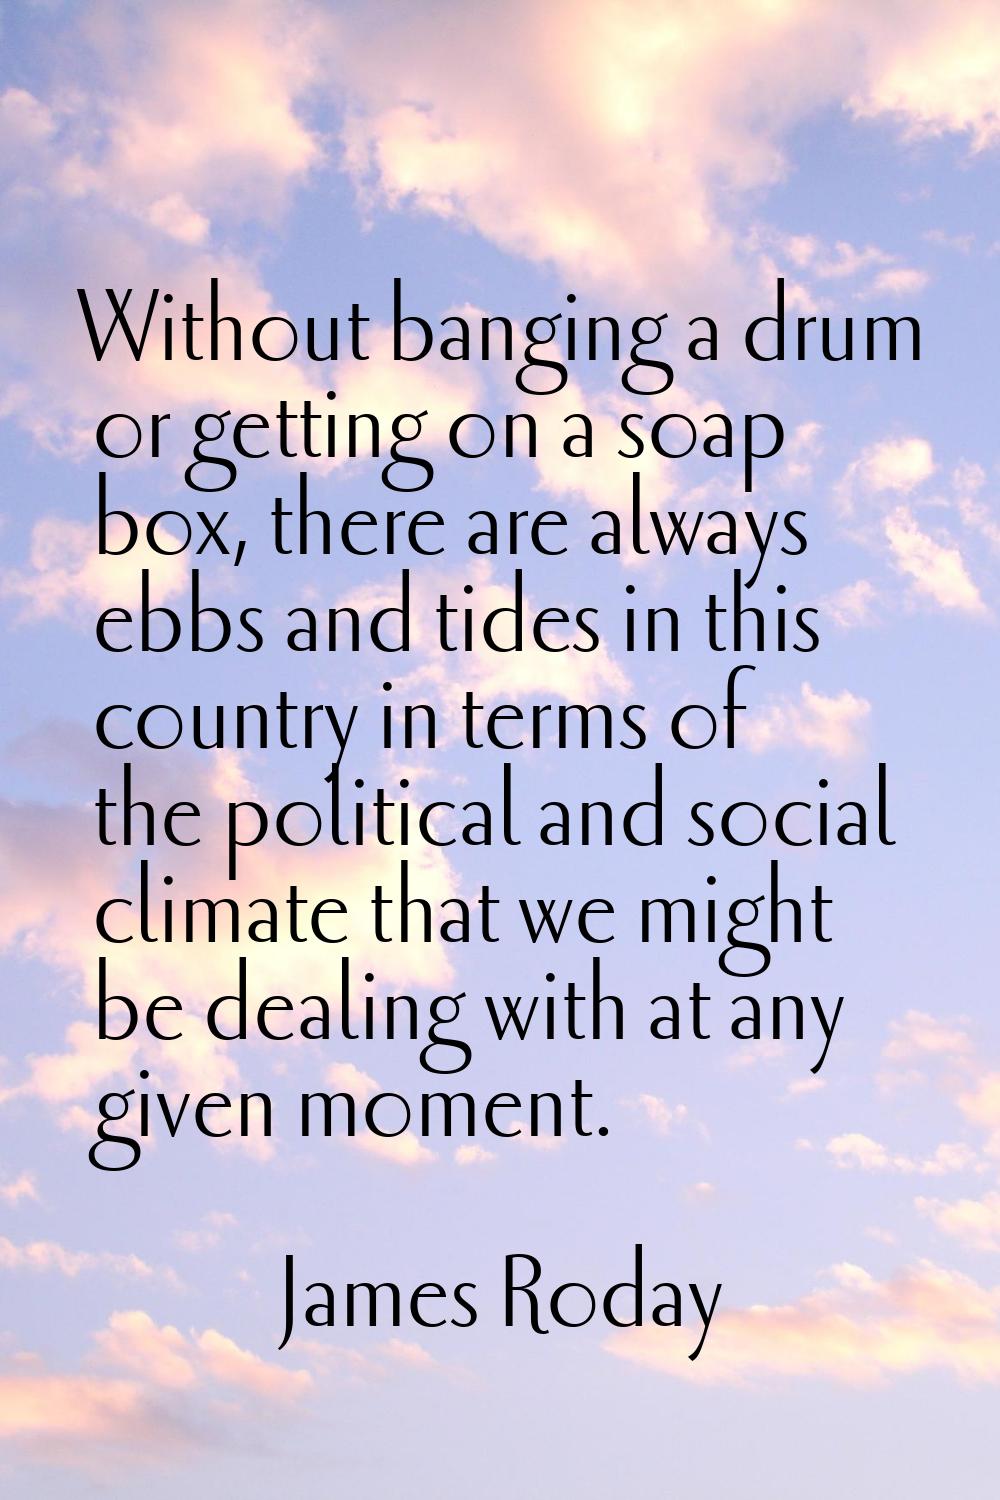 Without banging a drum or getting on a soap box, there are always ebbs and tides in this country in